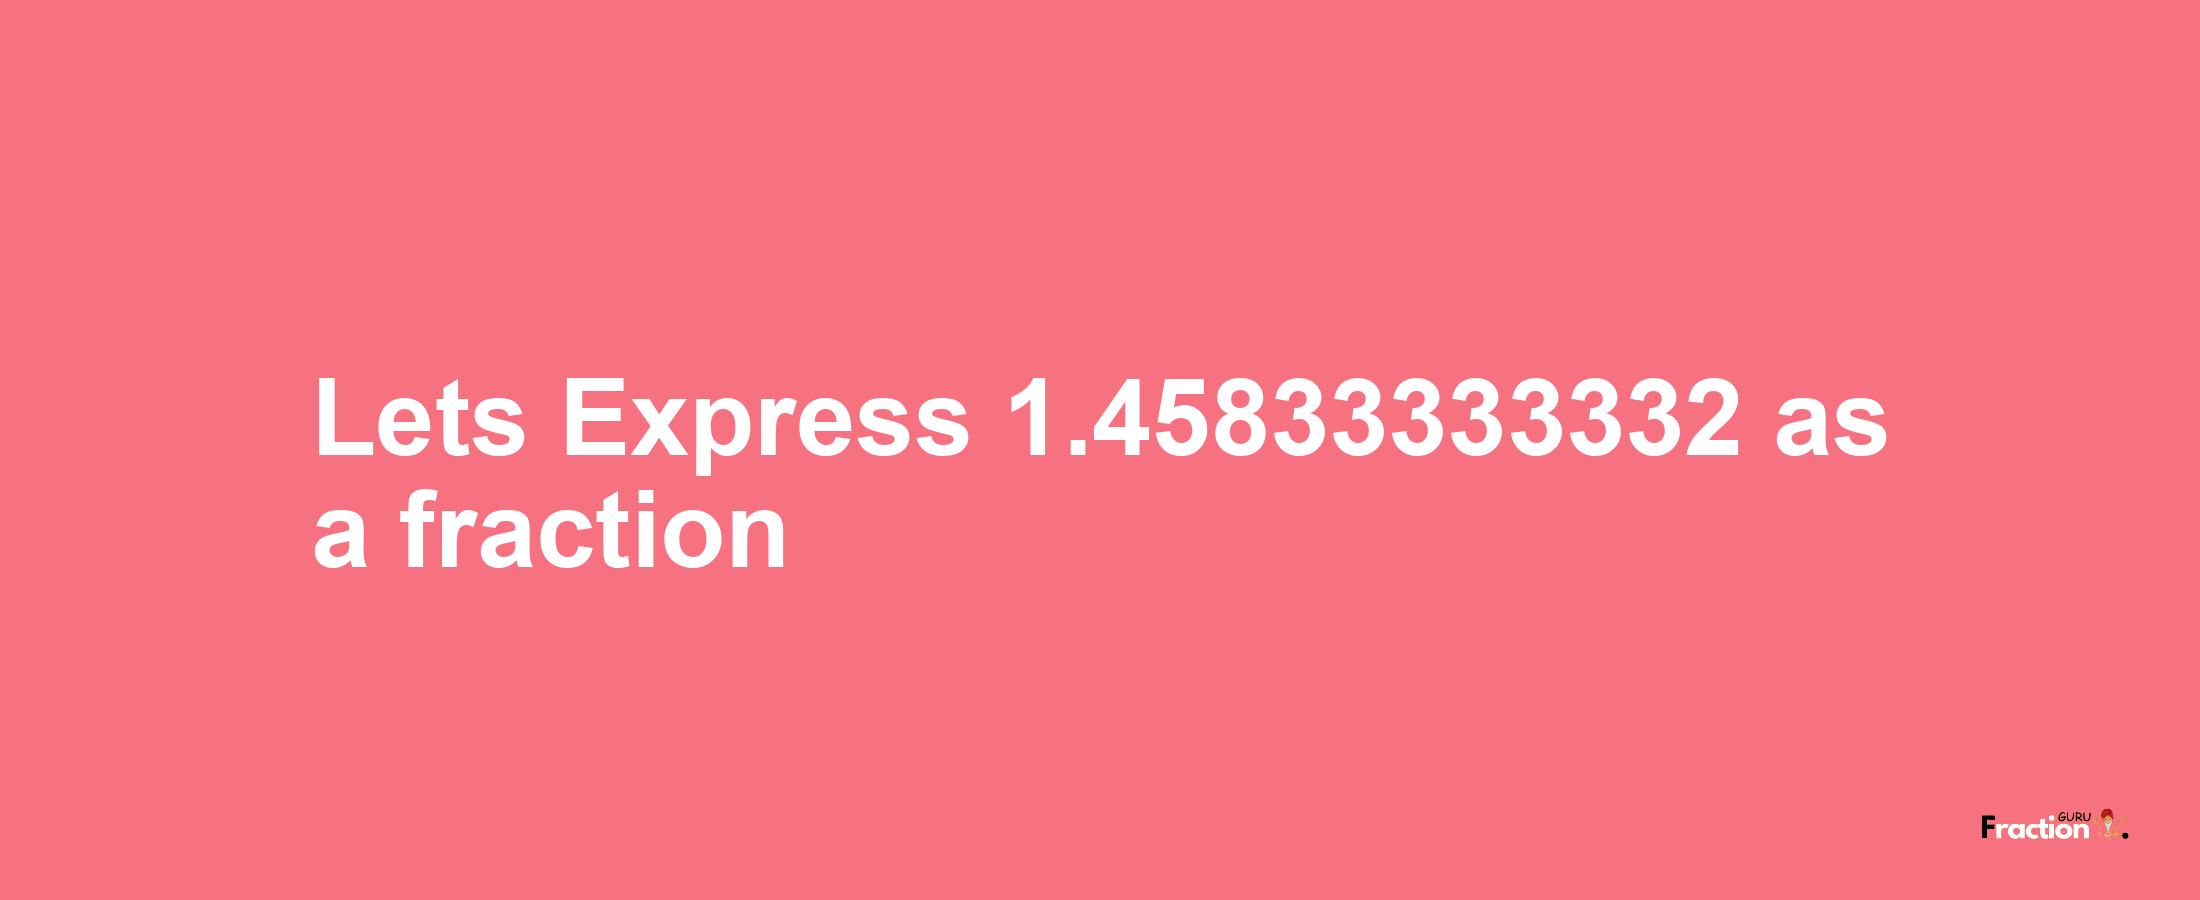 Lets Express 1.45833333332 as afraction